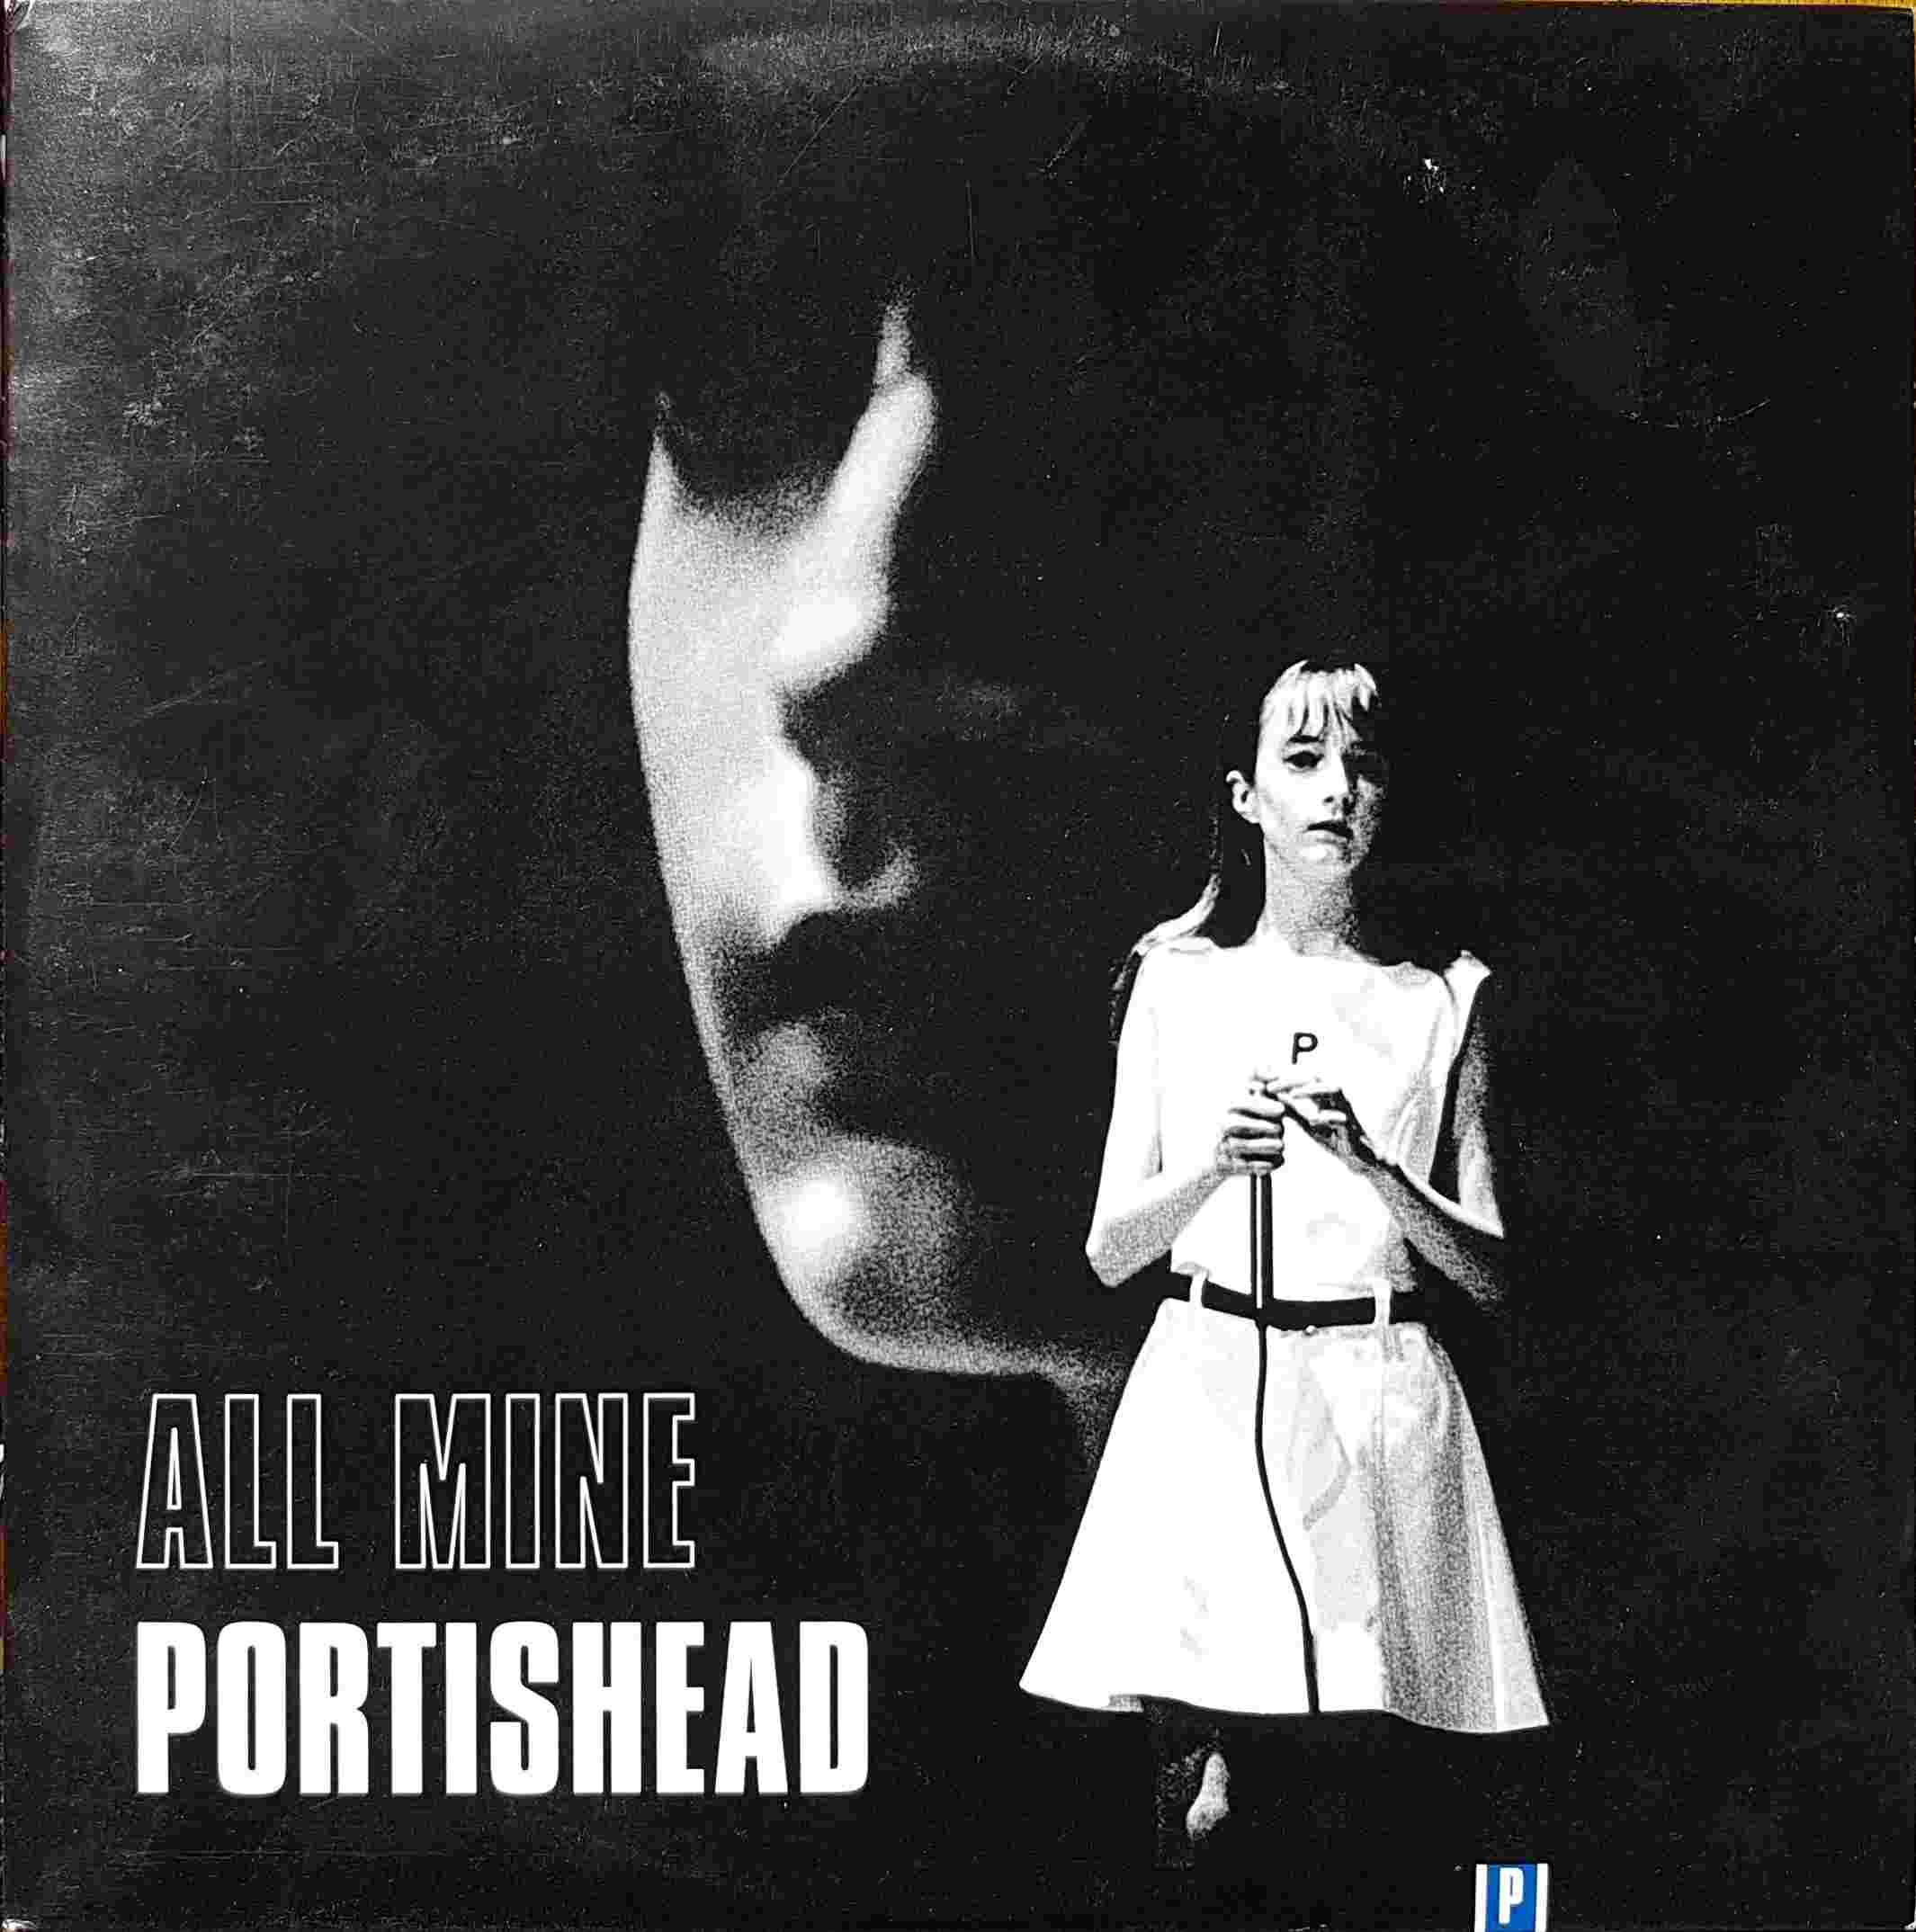 Picture of All mine by artist Geoff Barrow / Beth Gibbons / Portishead 